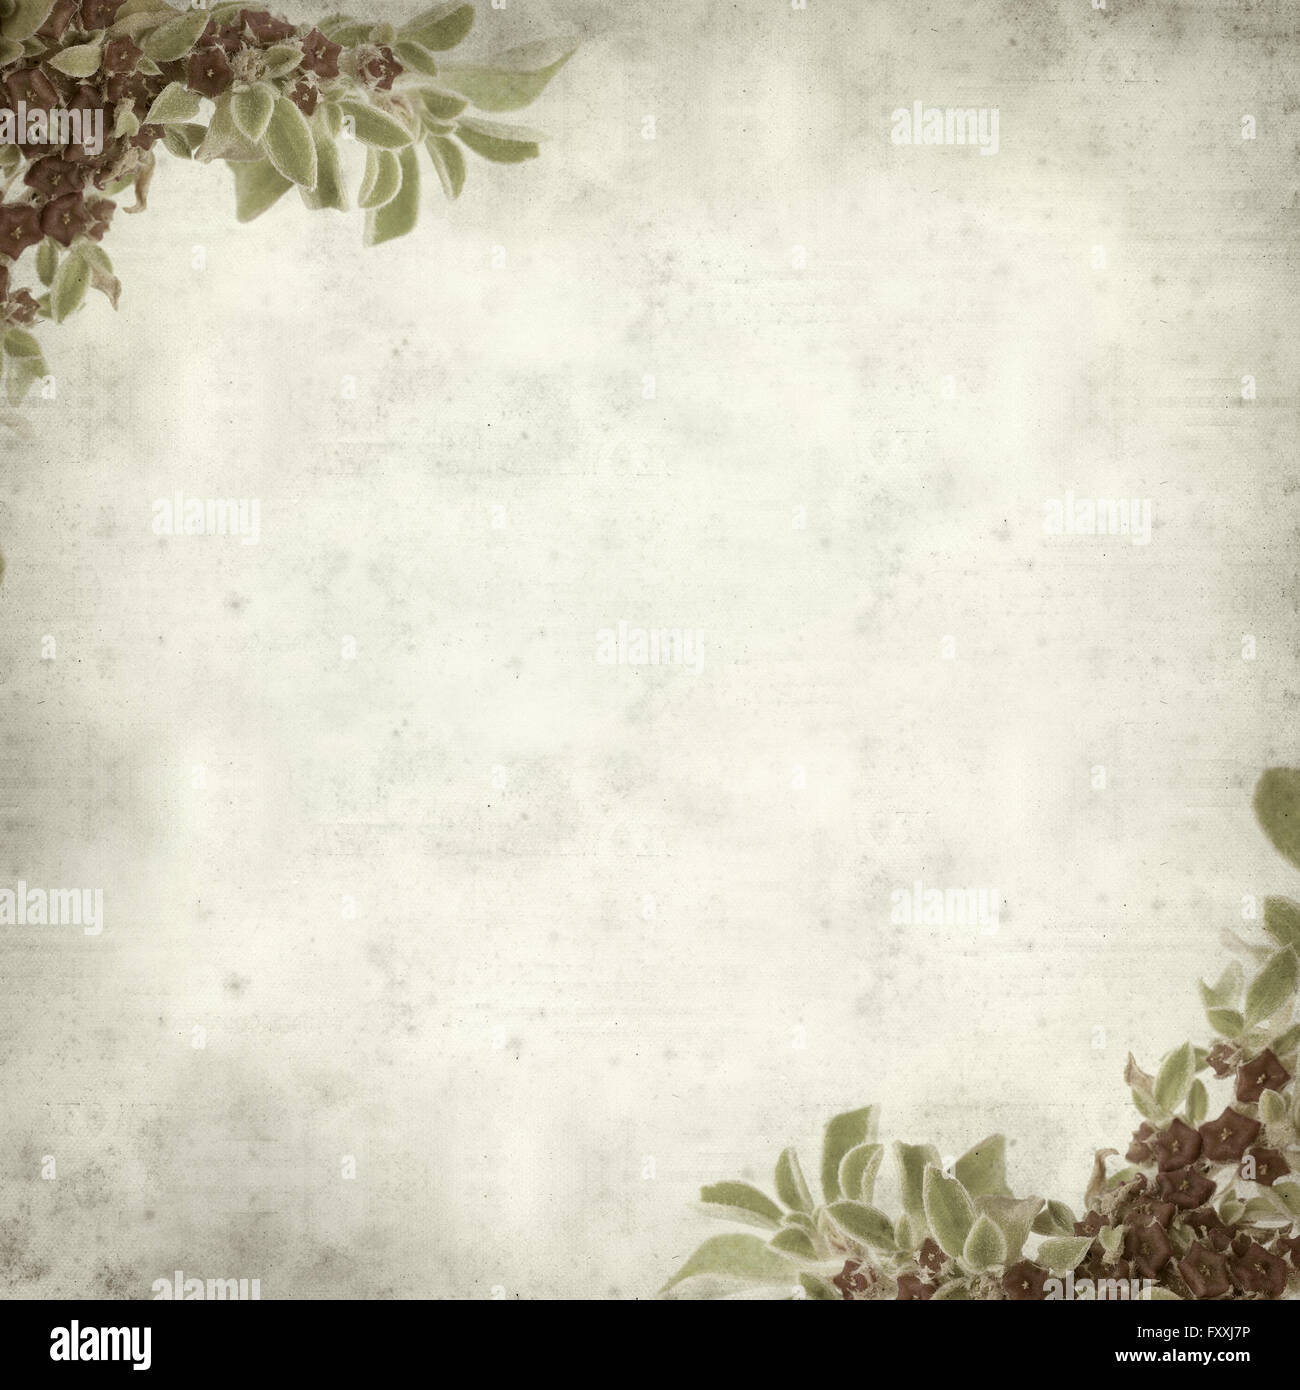 textured old paper background with succulent plant  Aizoon canariense, Canarian iceplant Stock Photo